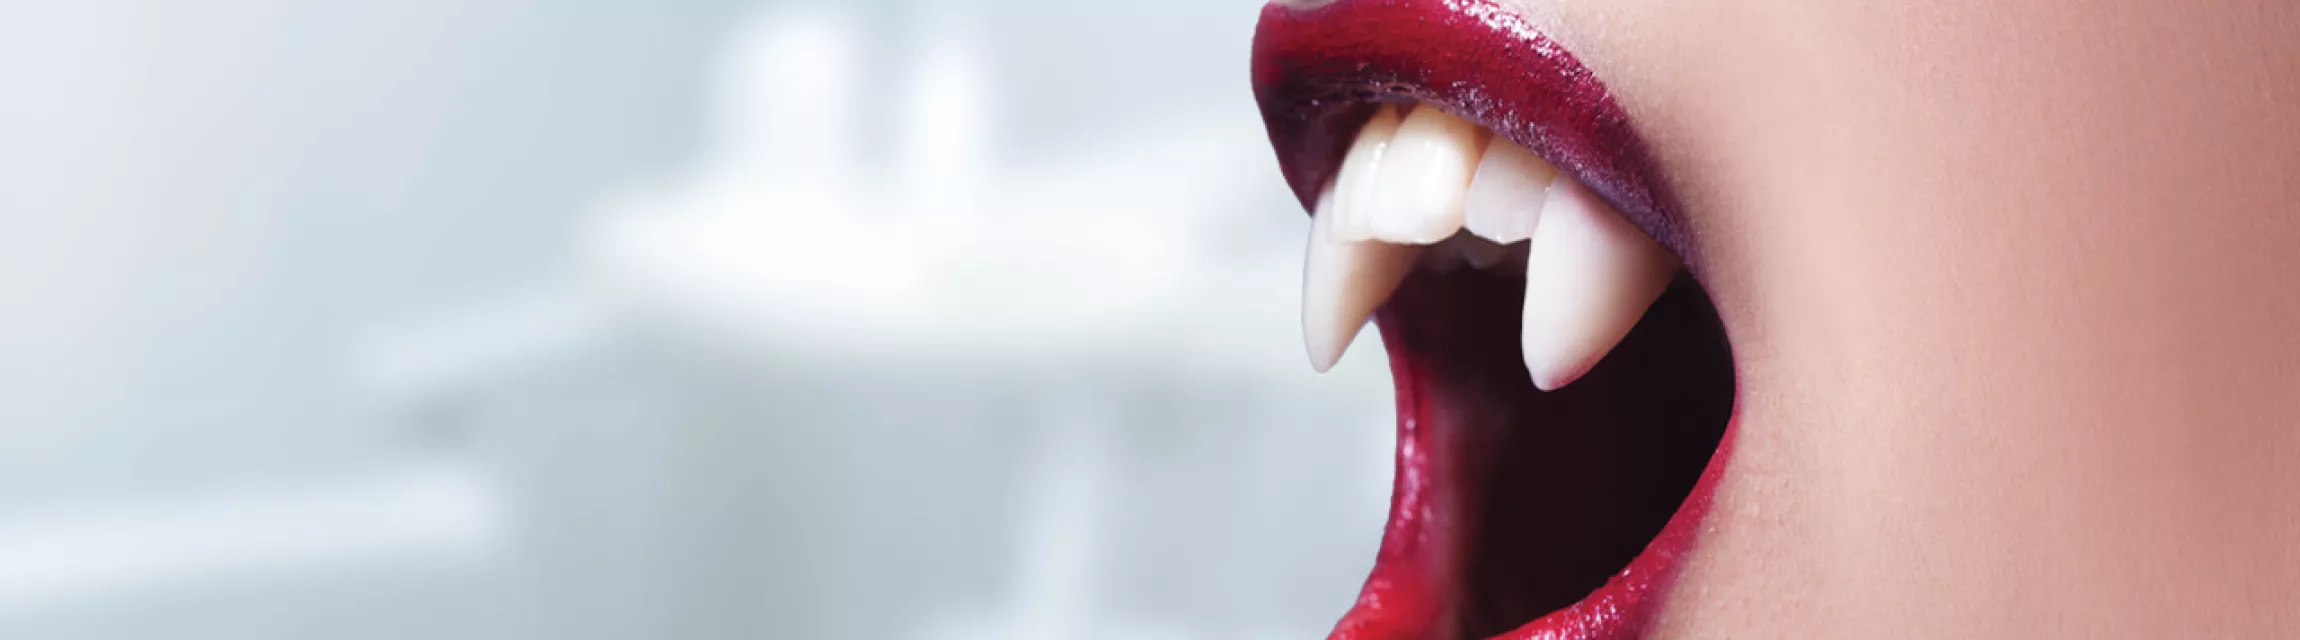 A person wearing vampire teeth.